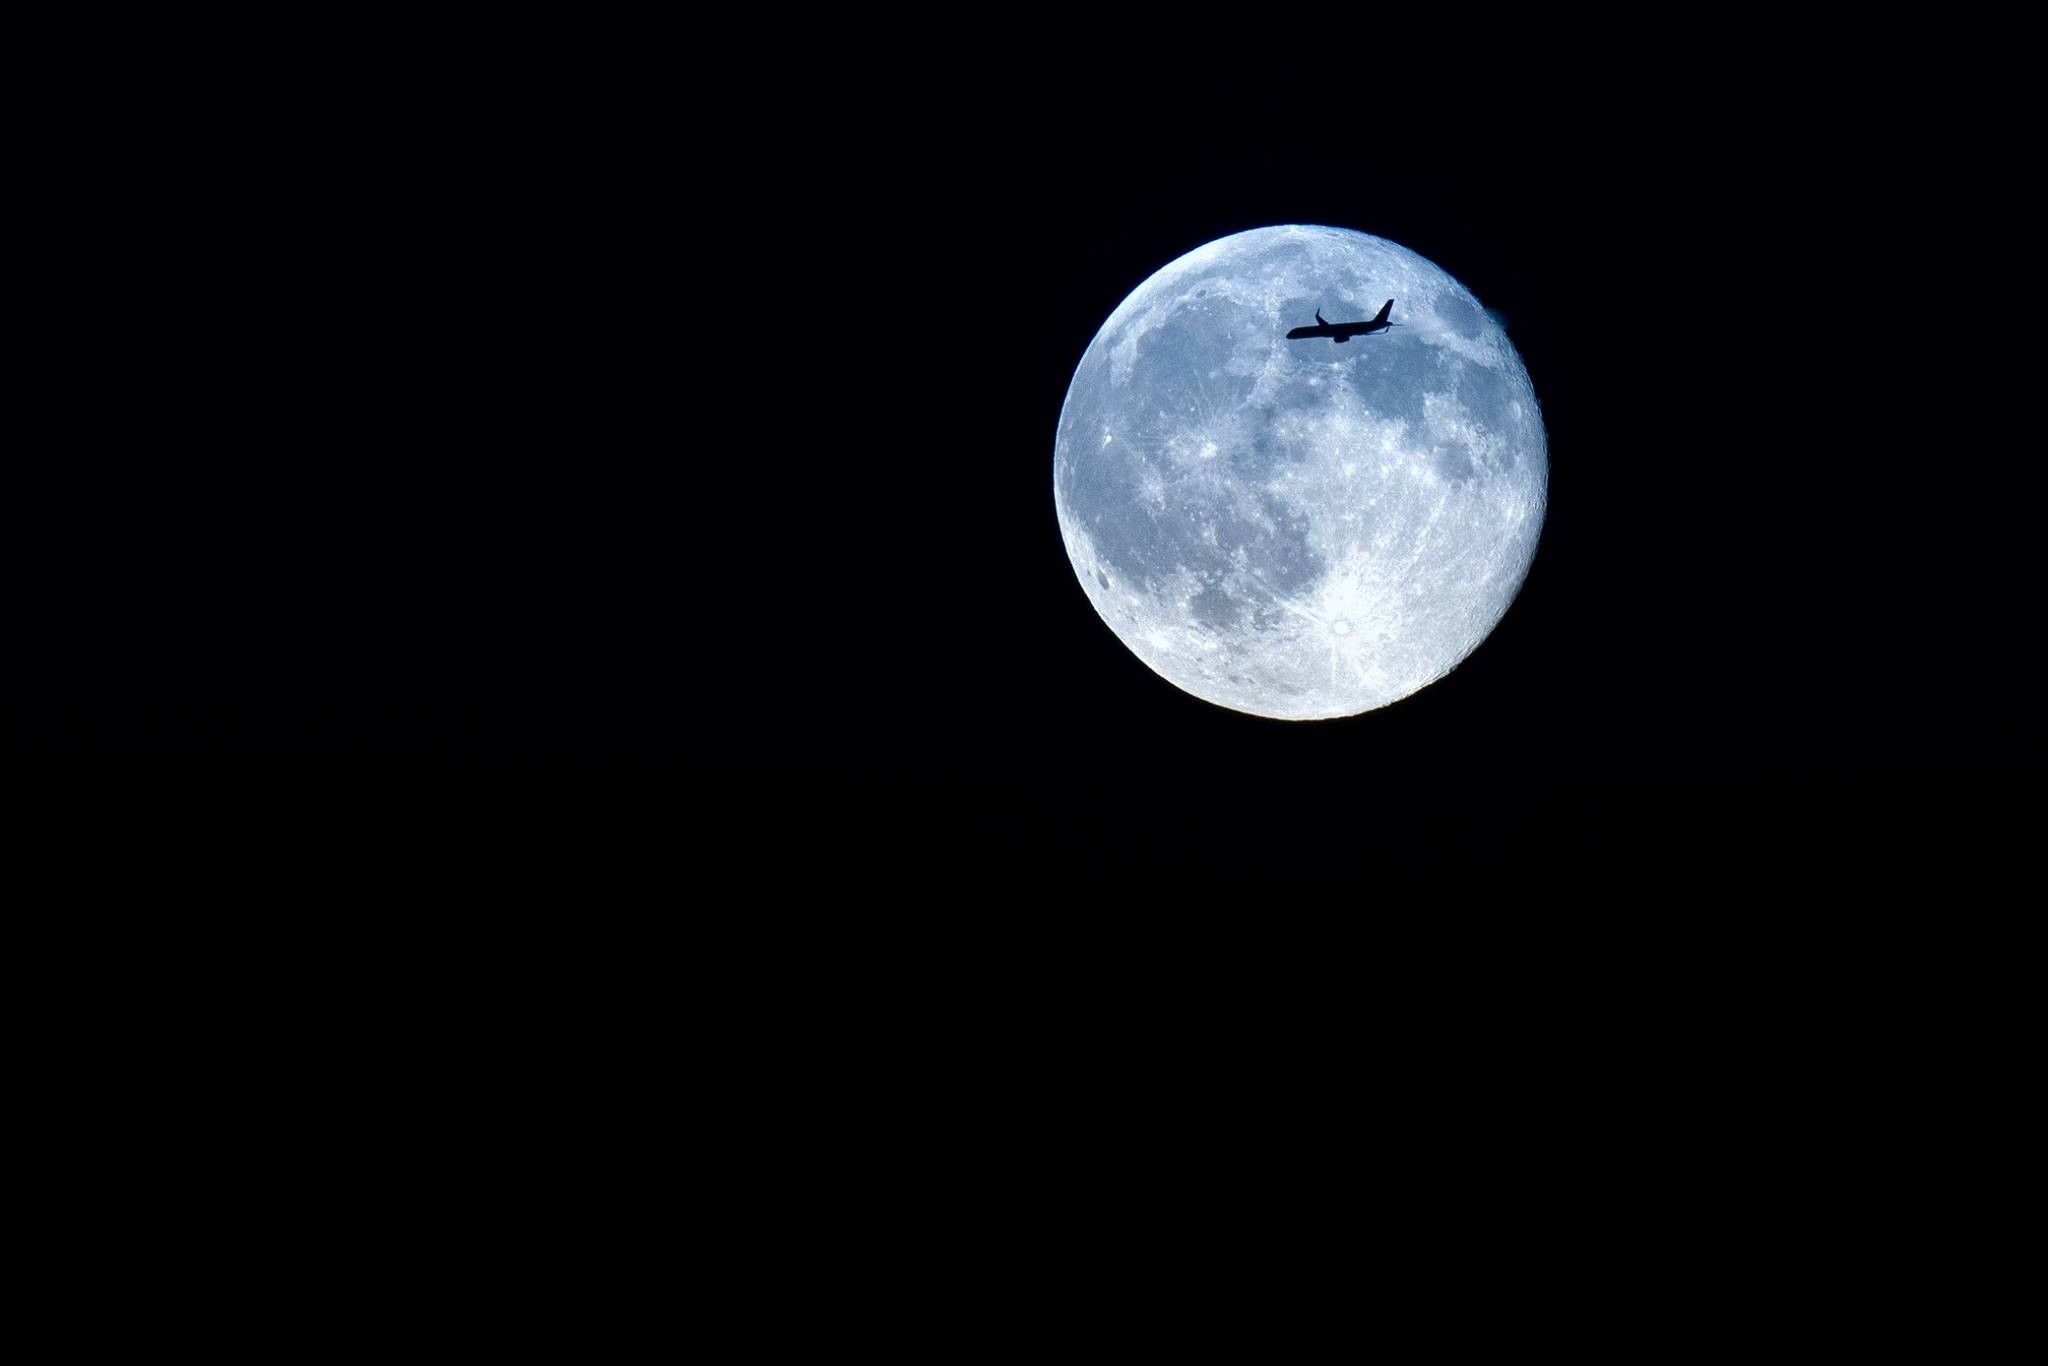 General 2048x1366 Moon airplane night silhouette aircraft sky vehicle